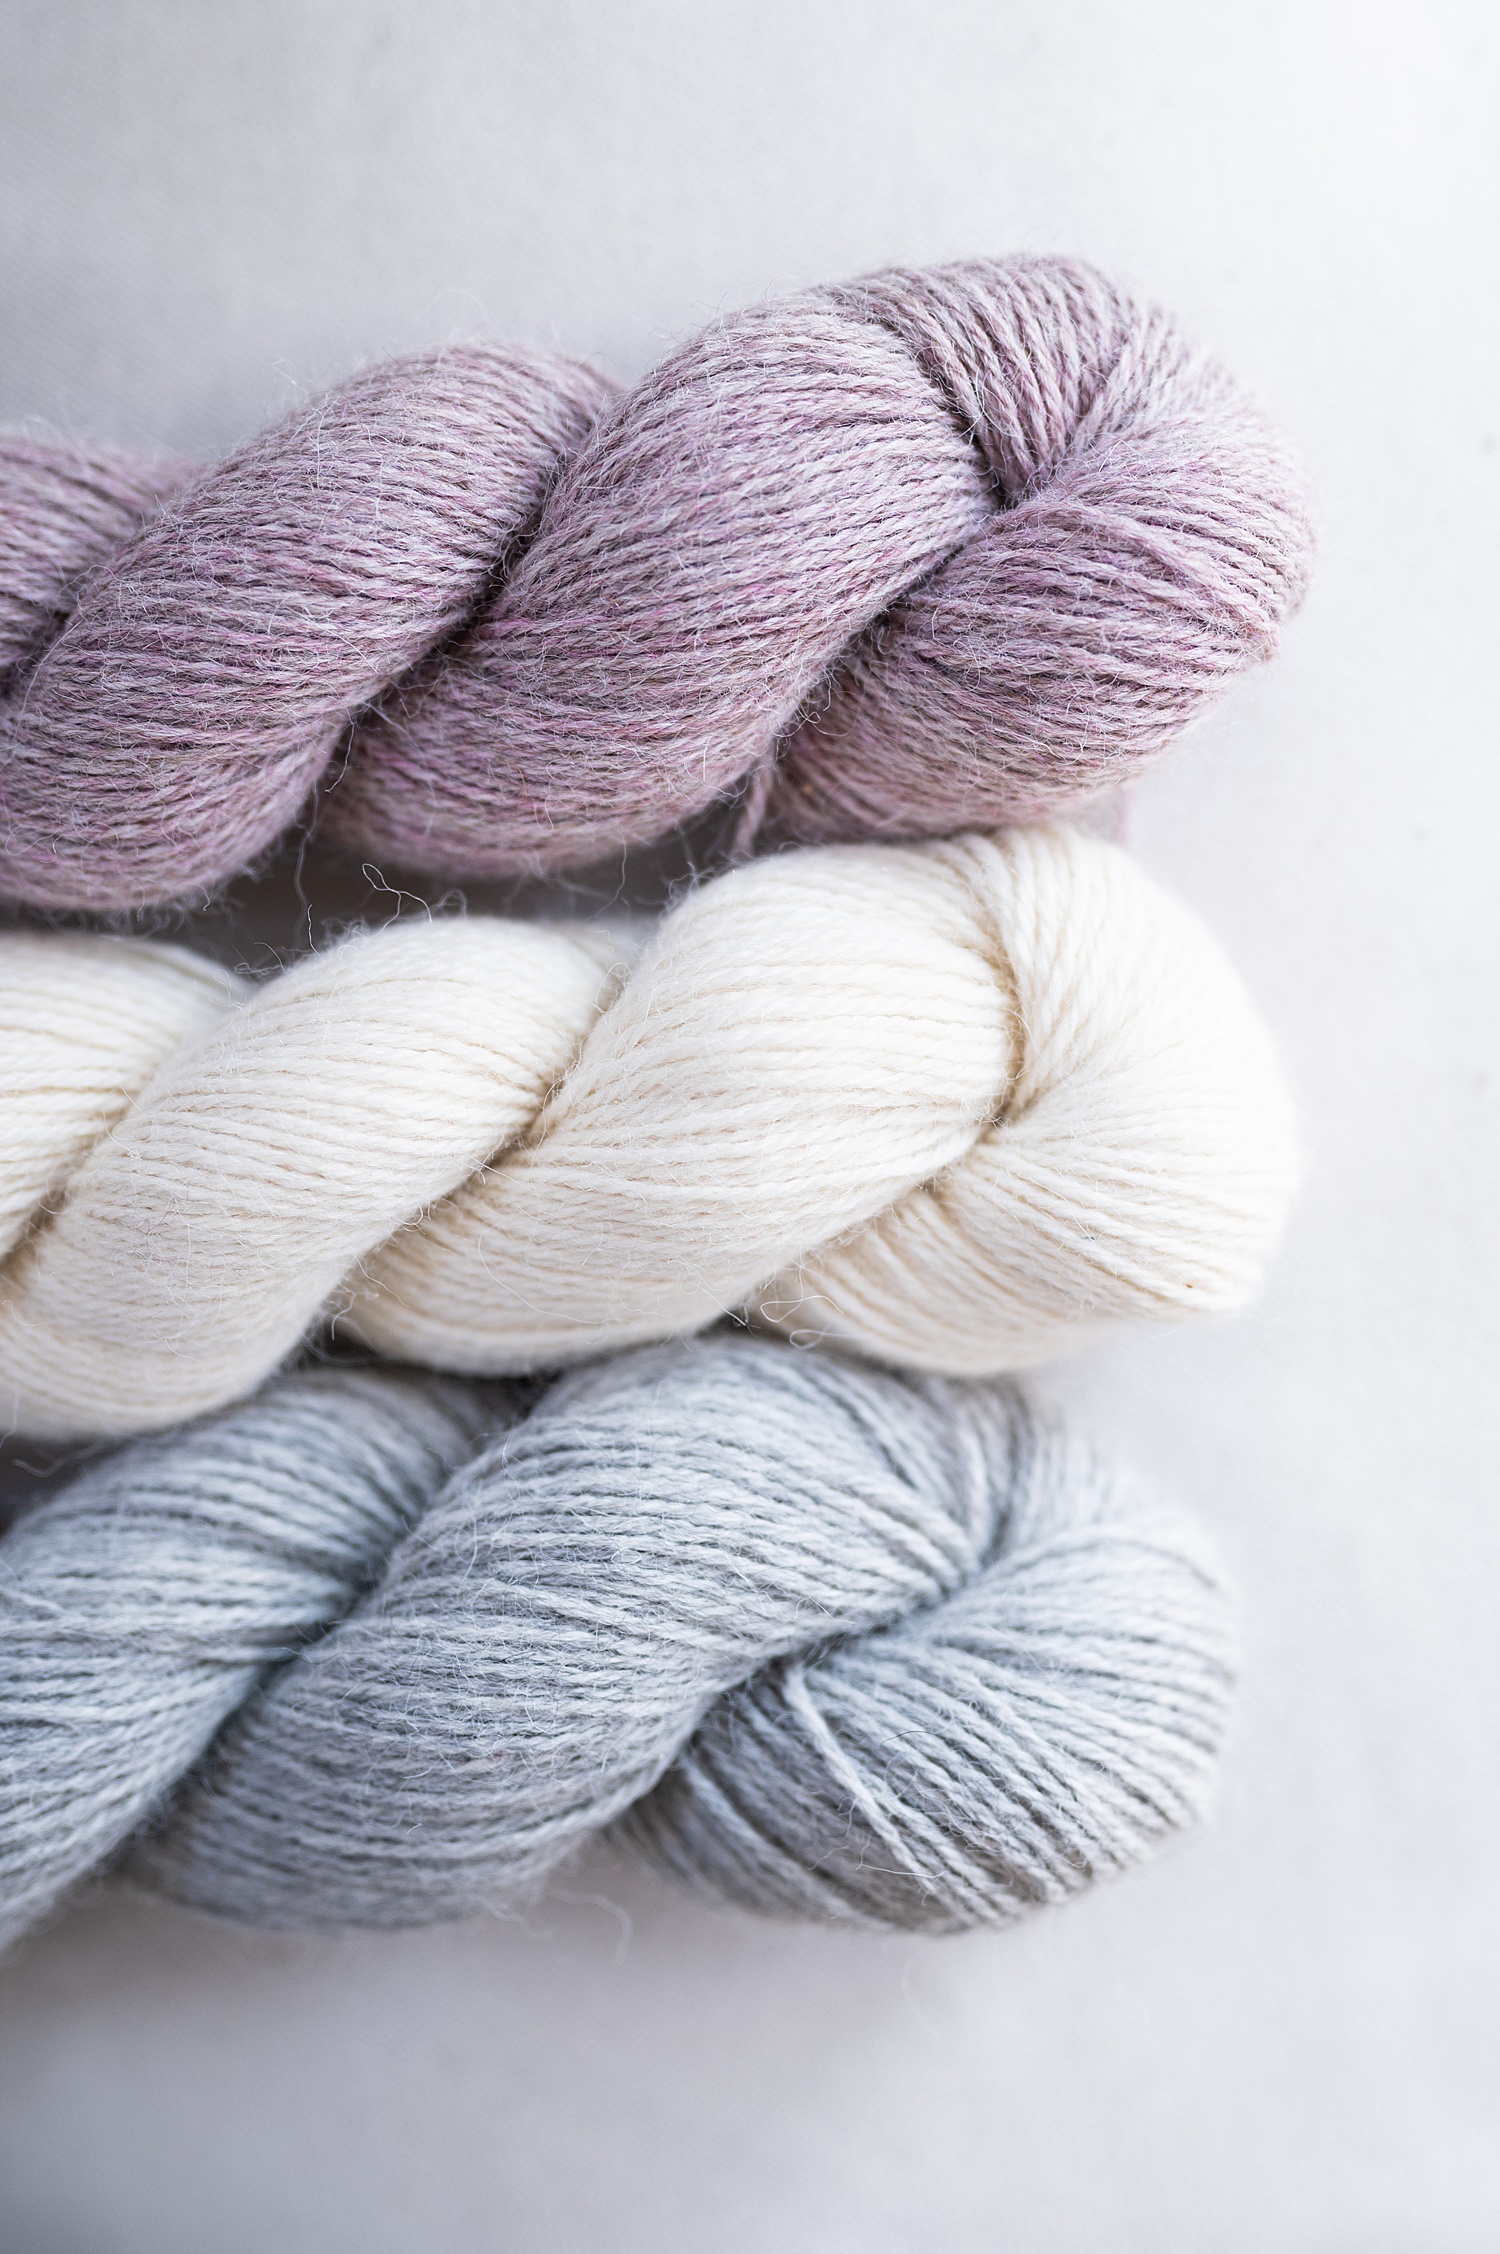 Yarn Review: New Yarns To Try From WeCrochet + Crochet Pattern